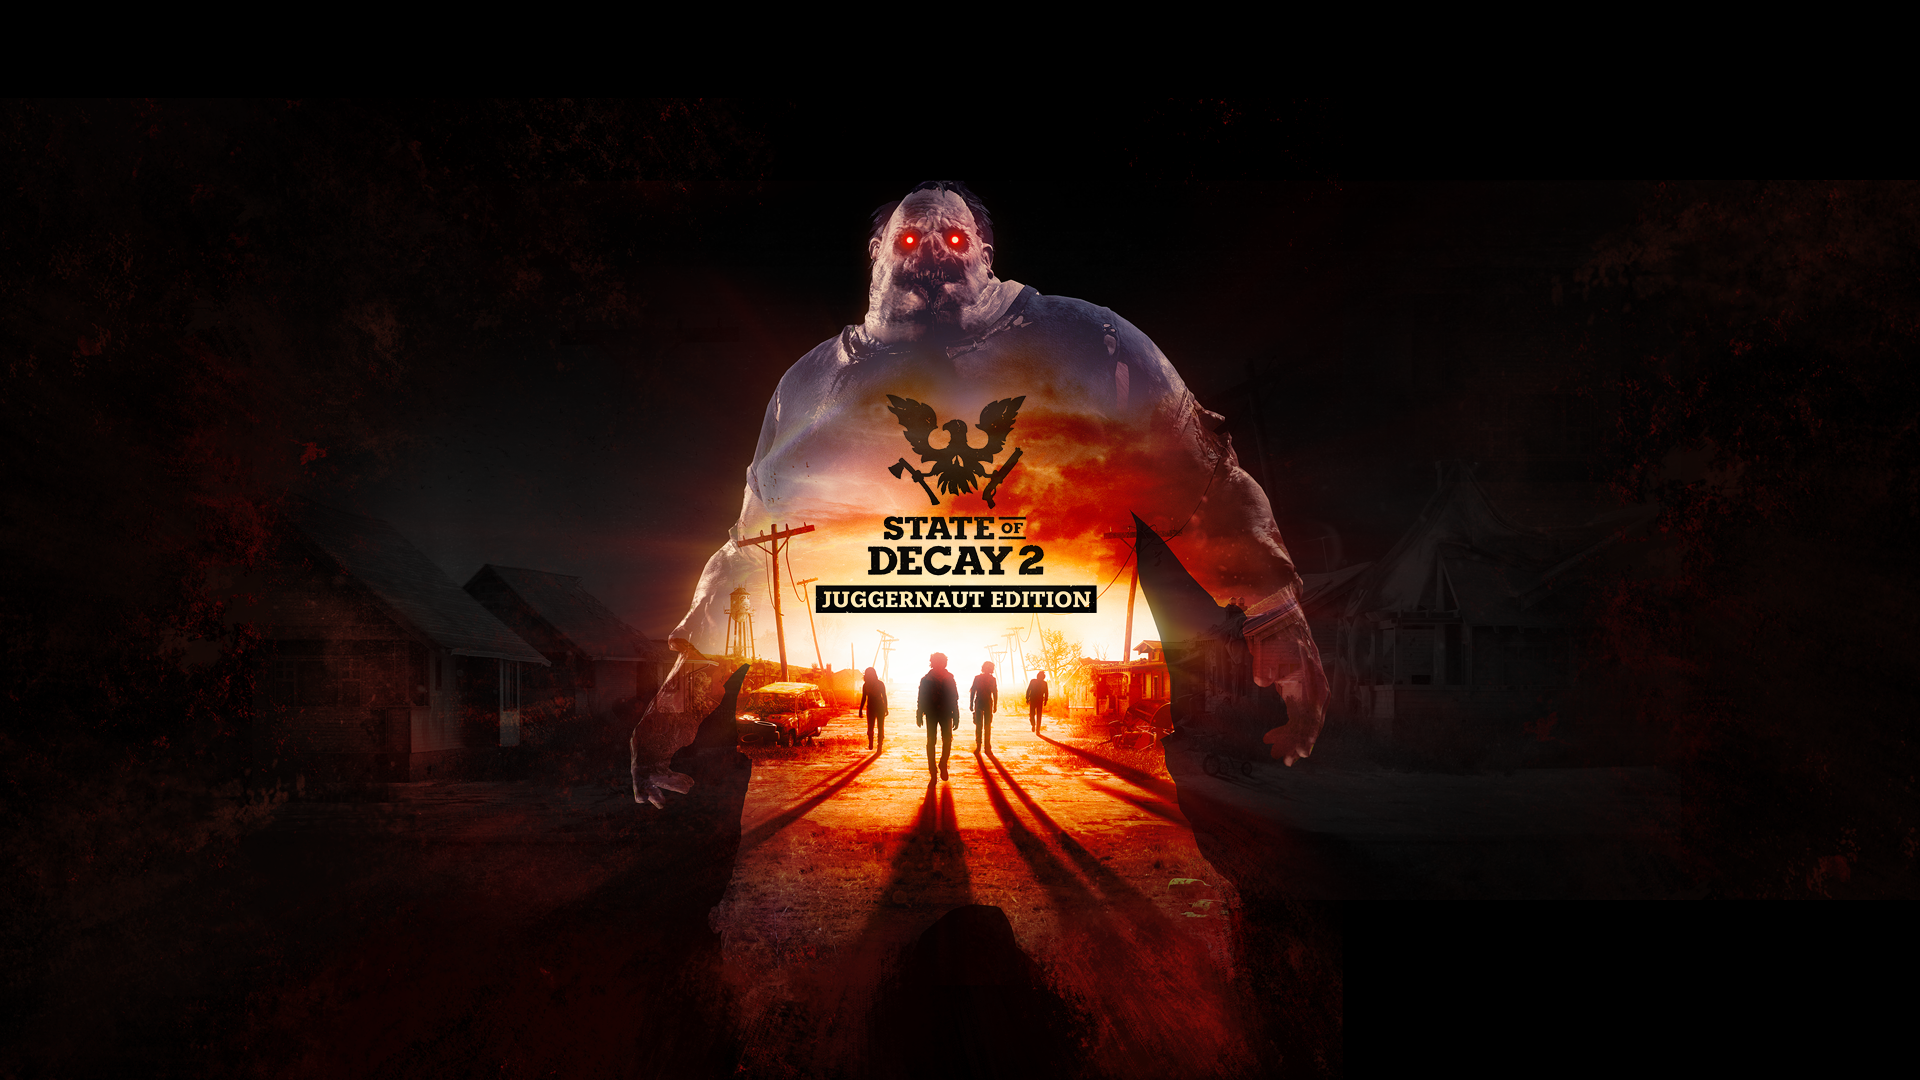 State of Decay 2: Juggernaut Edition launches March 13